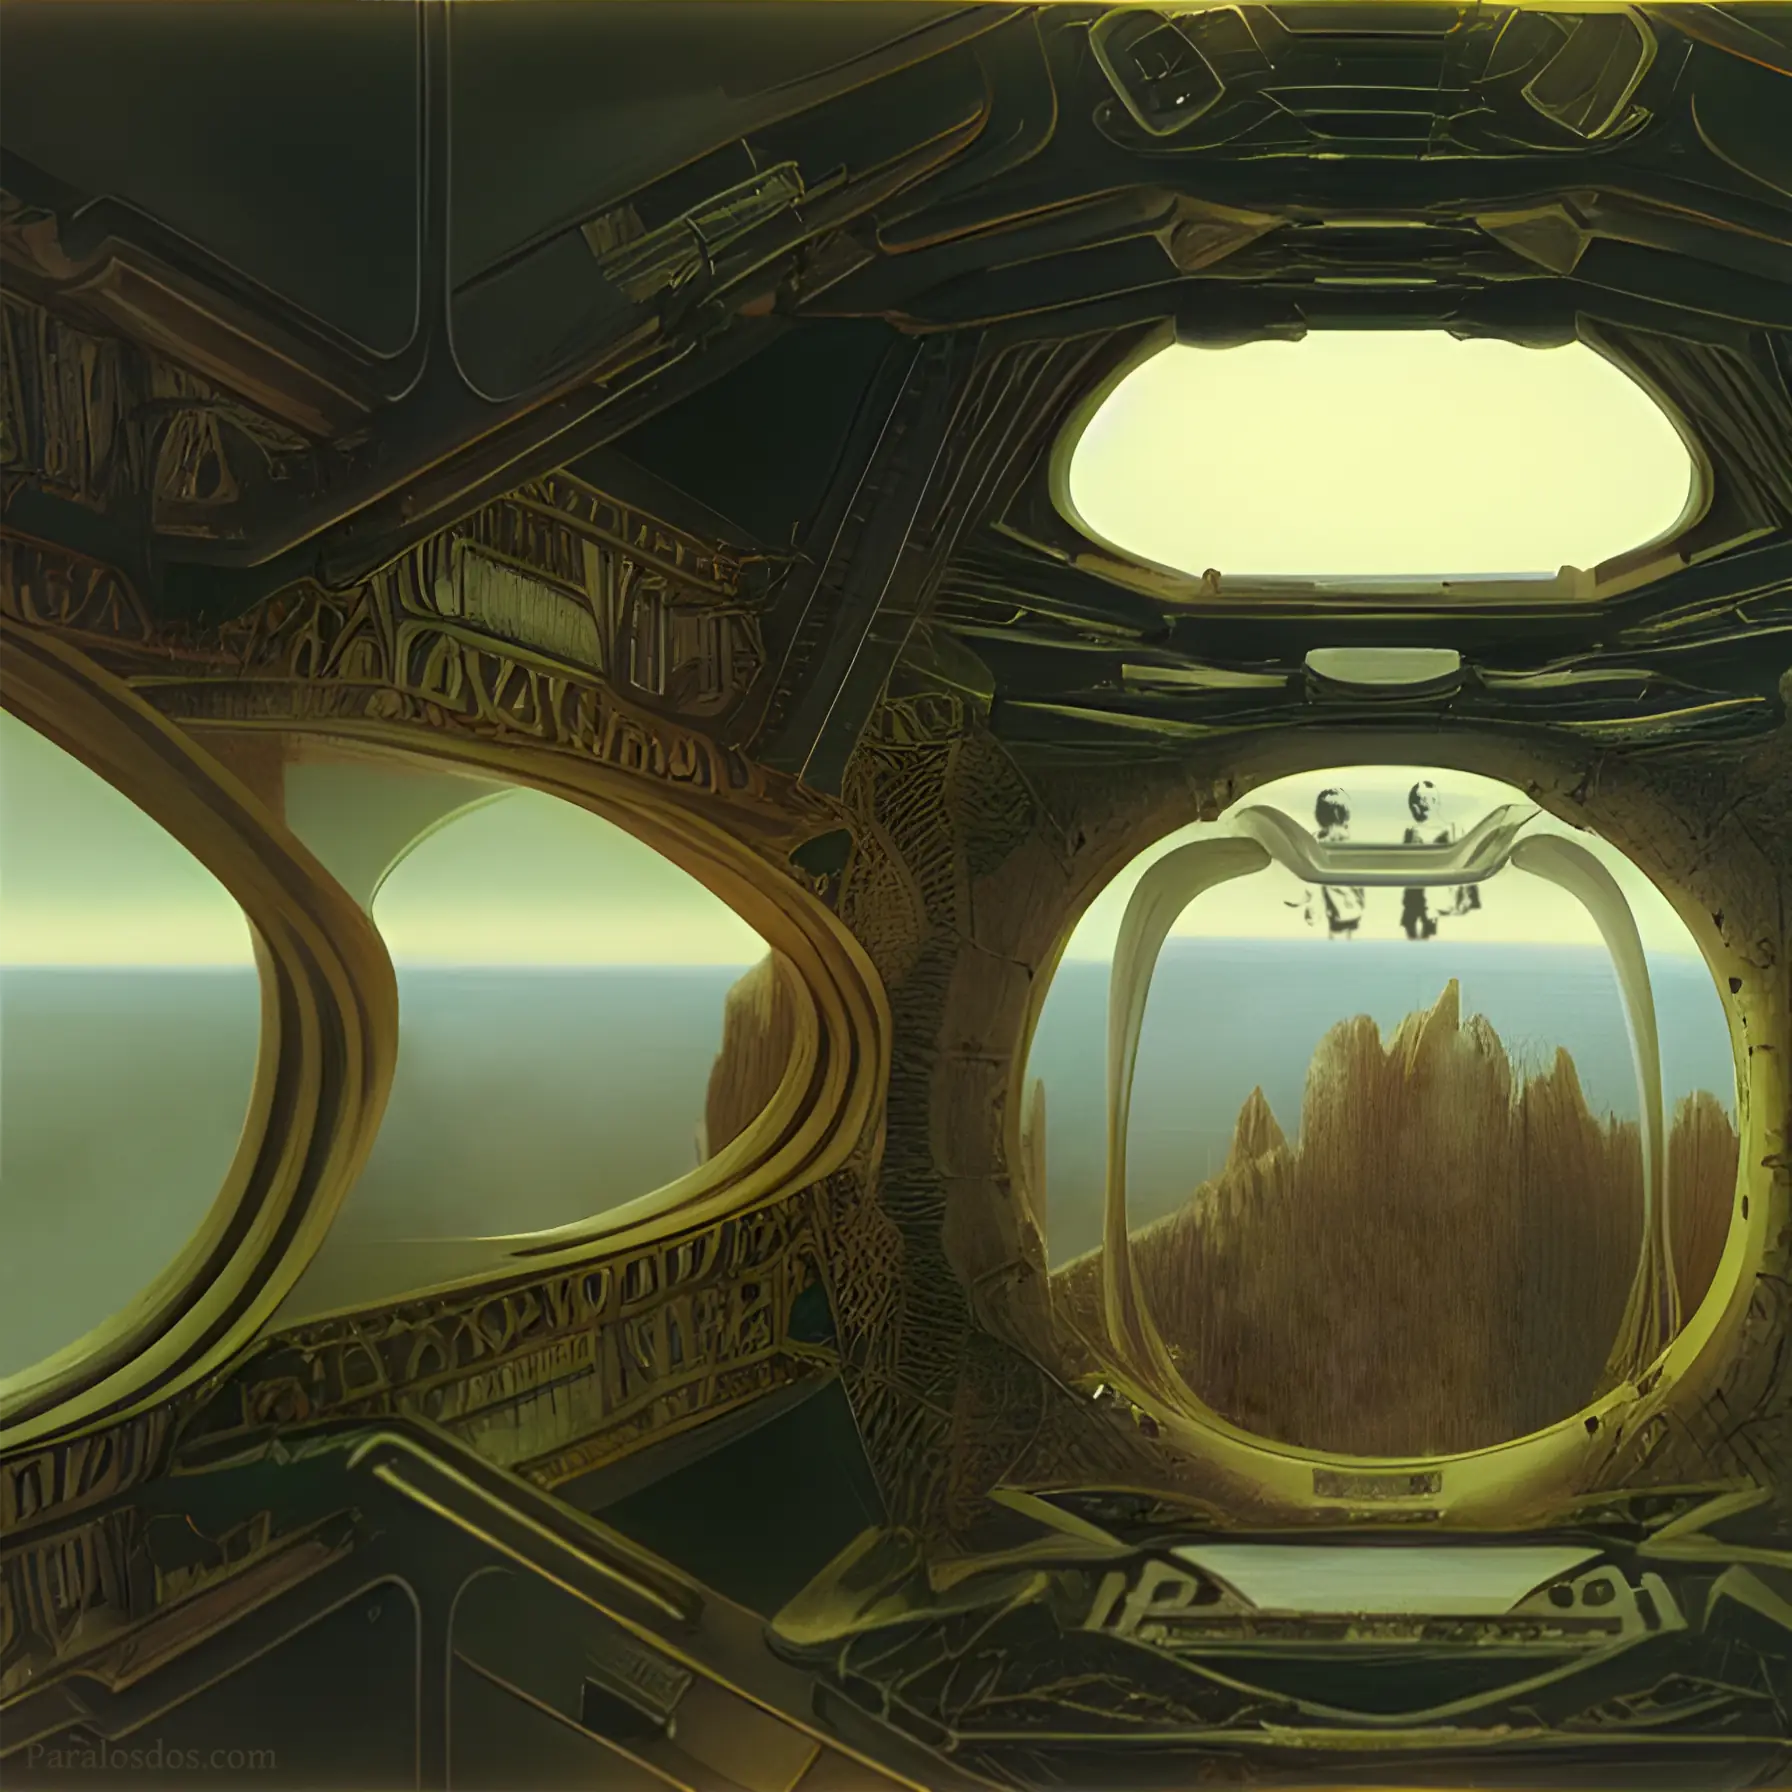 A fantastical artistic rendering from the inside of an alien spaceship, looking out onto mountains and the horizon of a vast ocean.